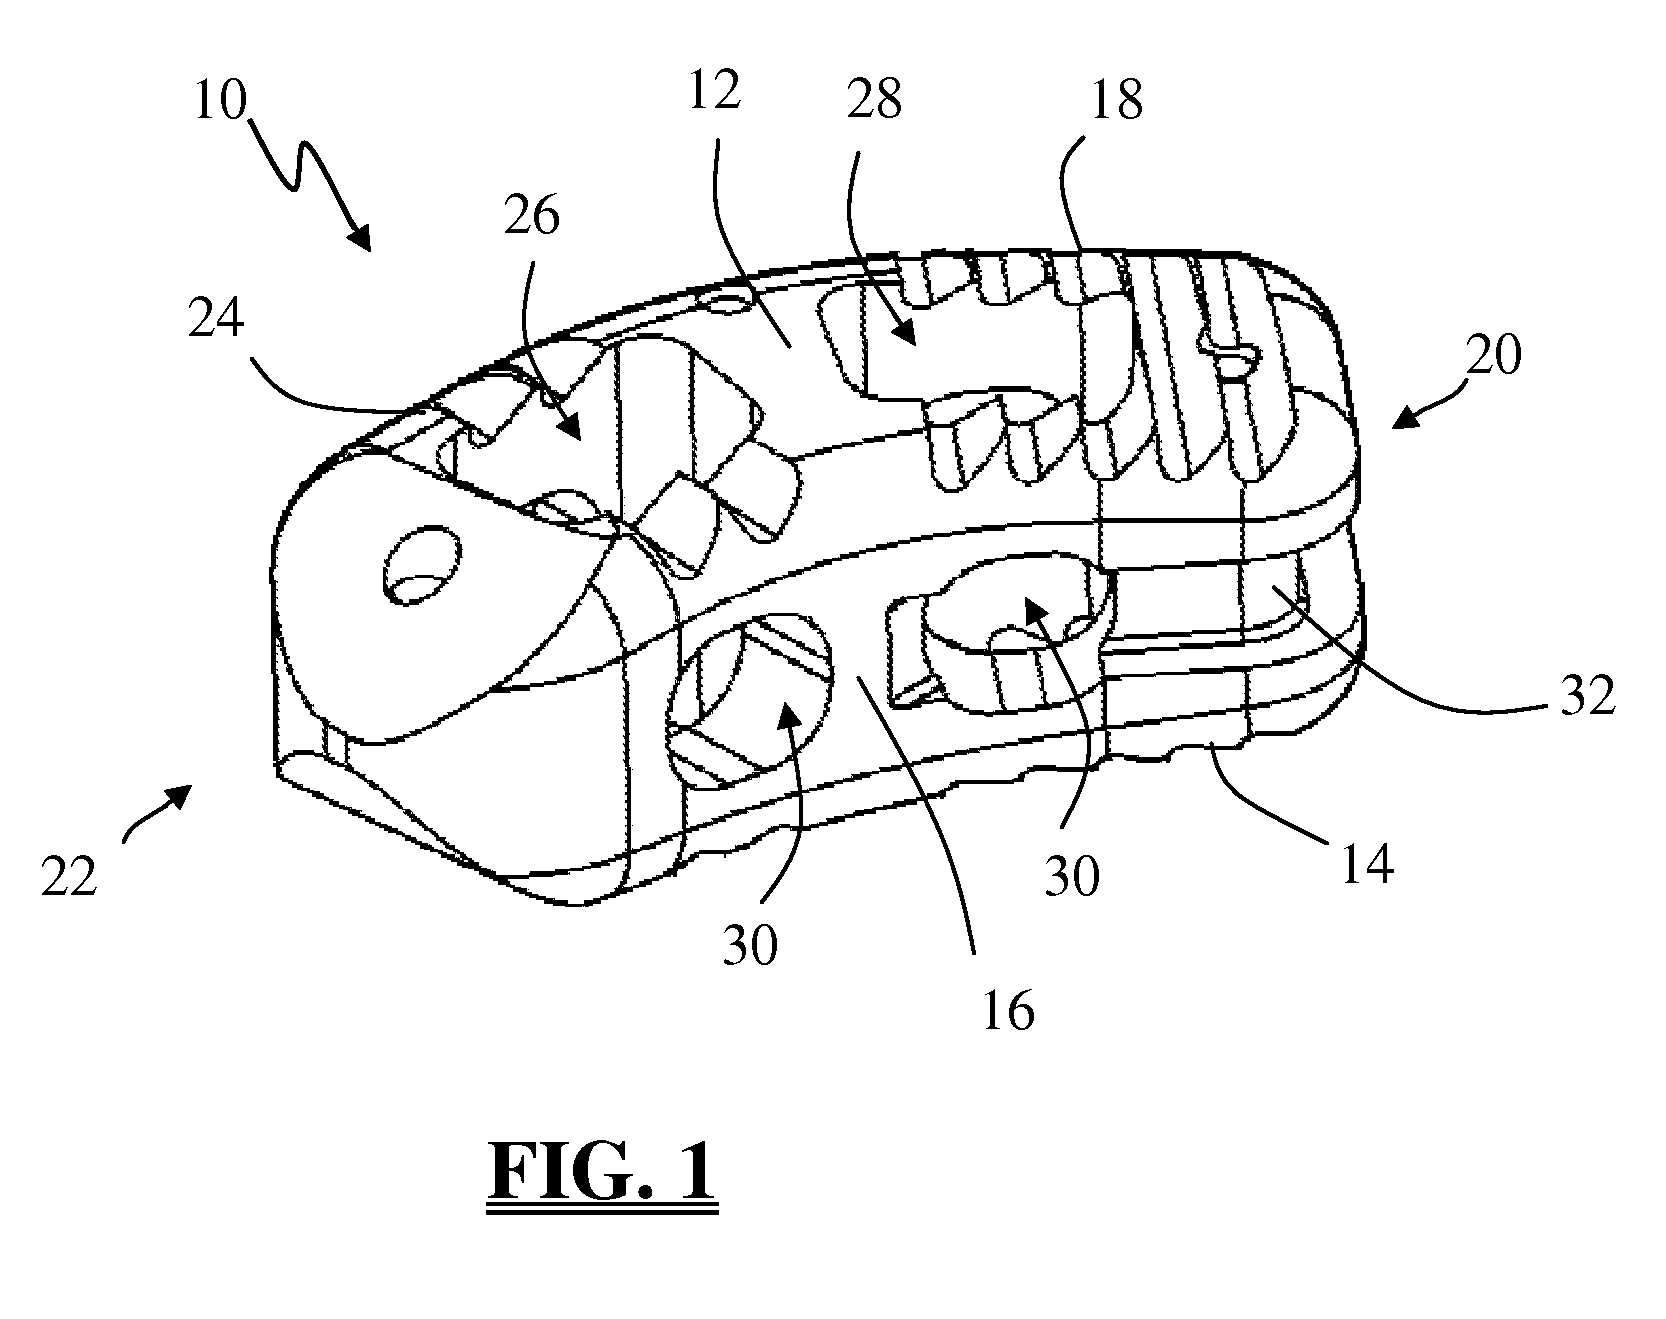 Spinal fusion implant and related methods